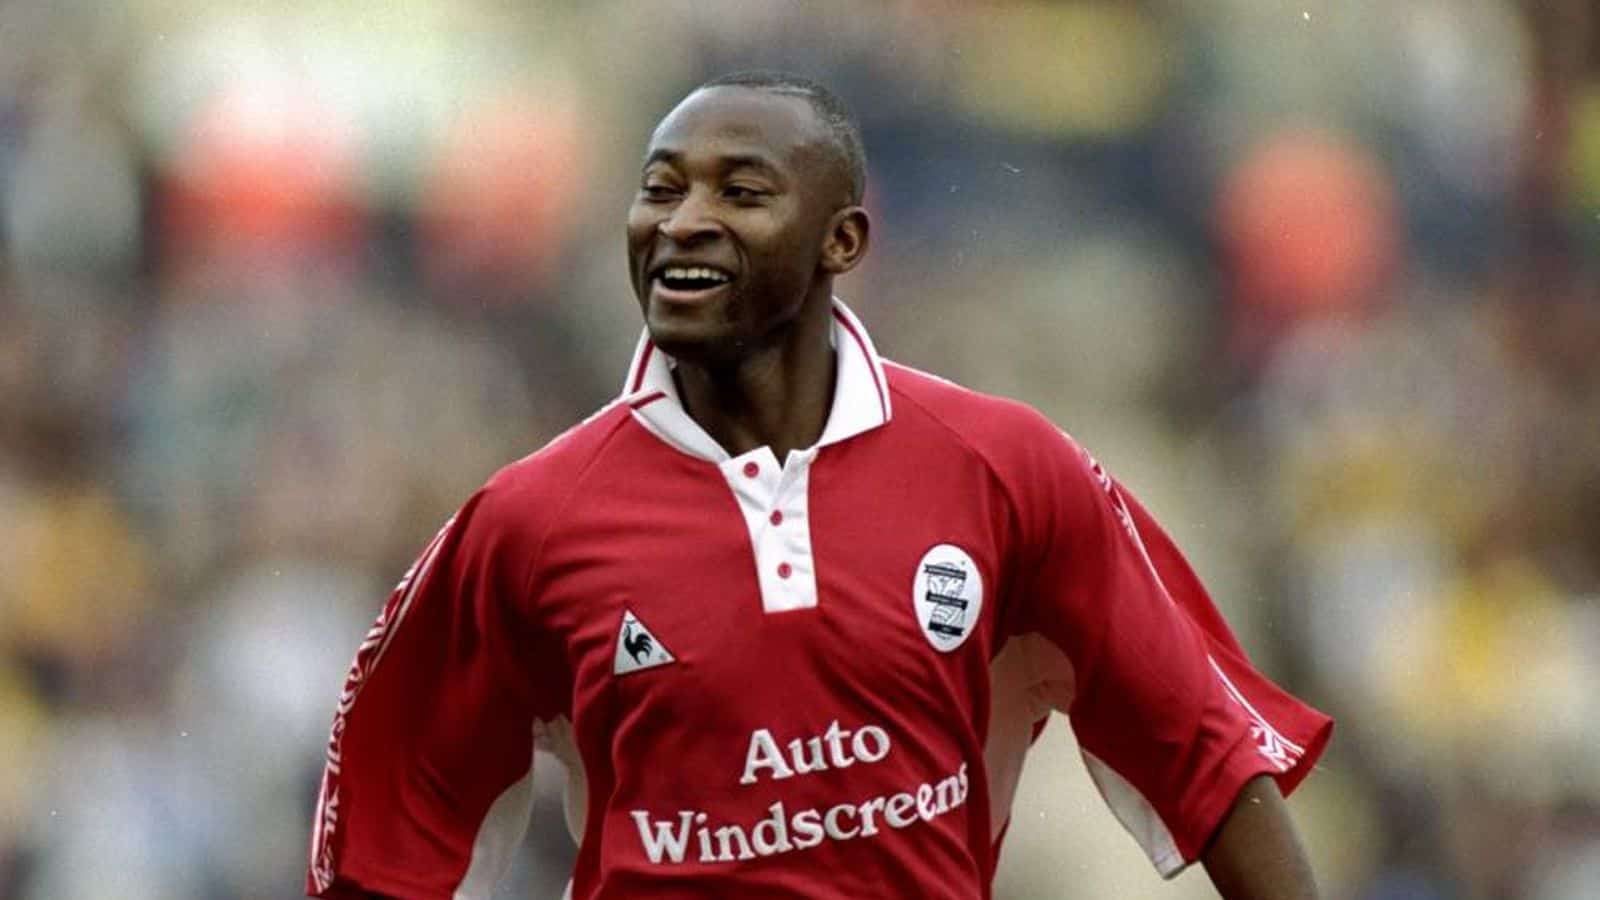 TODAY IN HISTORY: Peter Ndlovu scores Africa’s first rebranded EPL goal